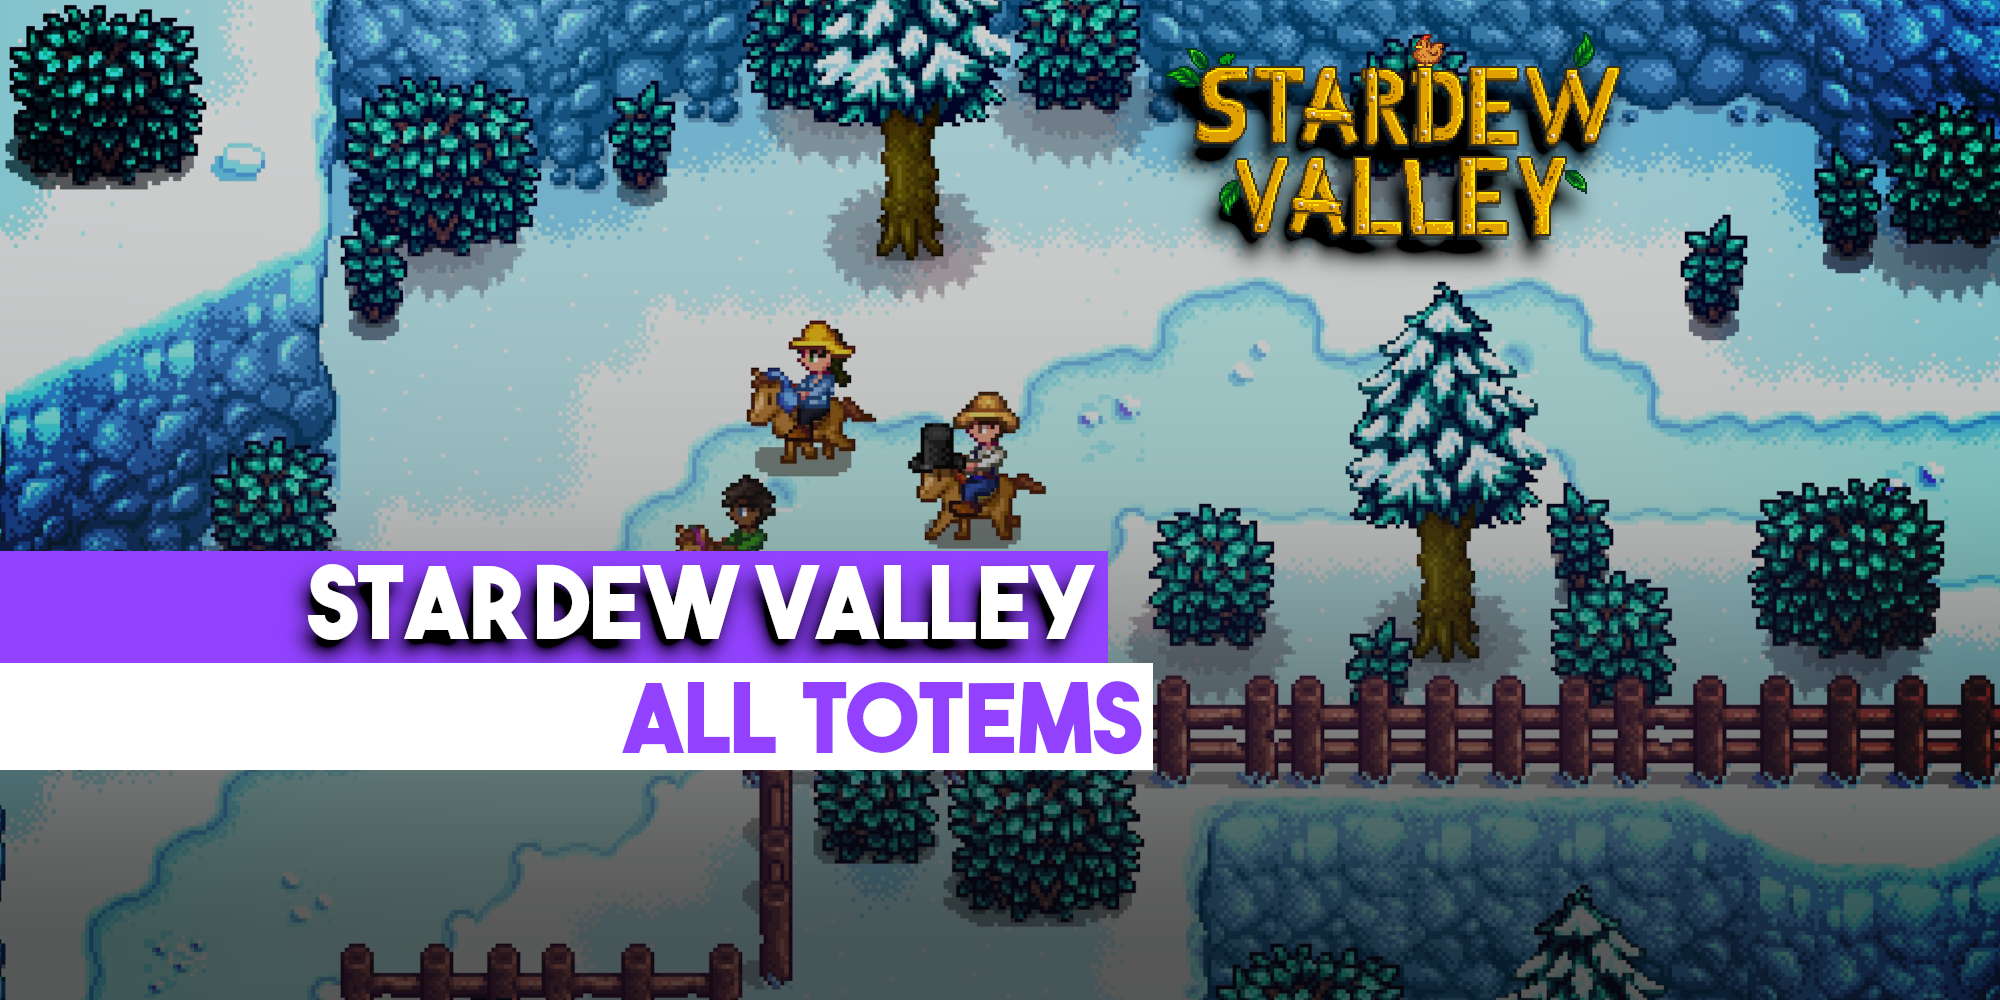 Stardew-Valley-All-Totems